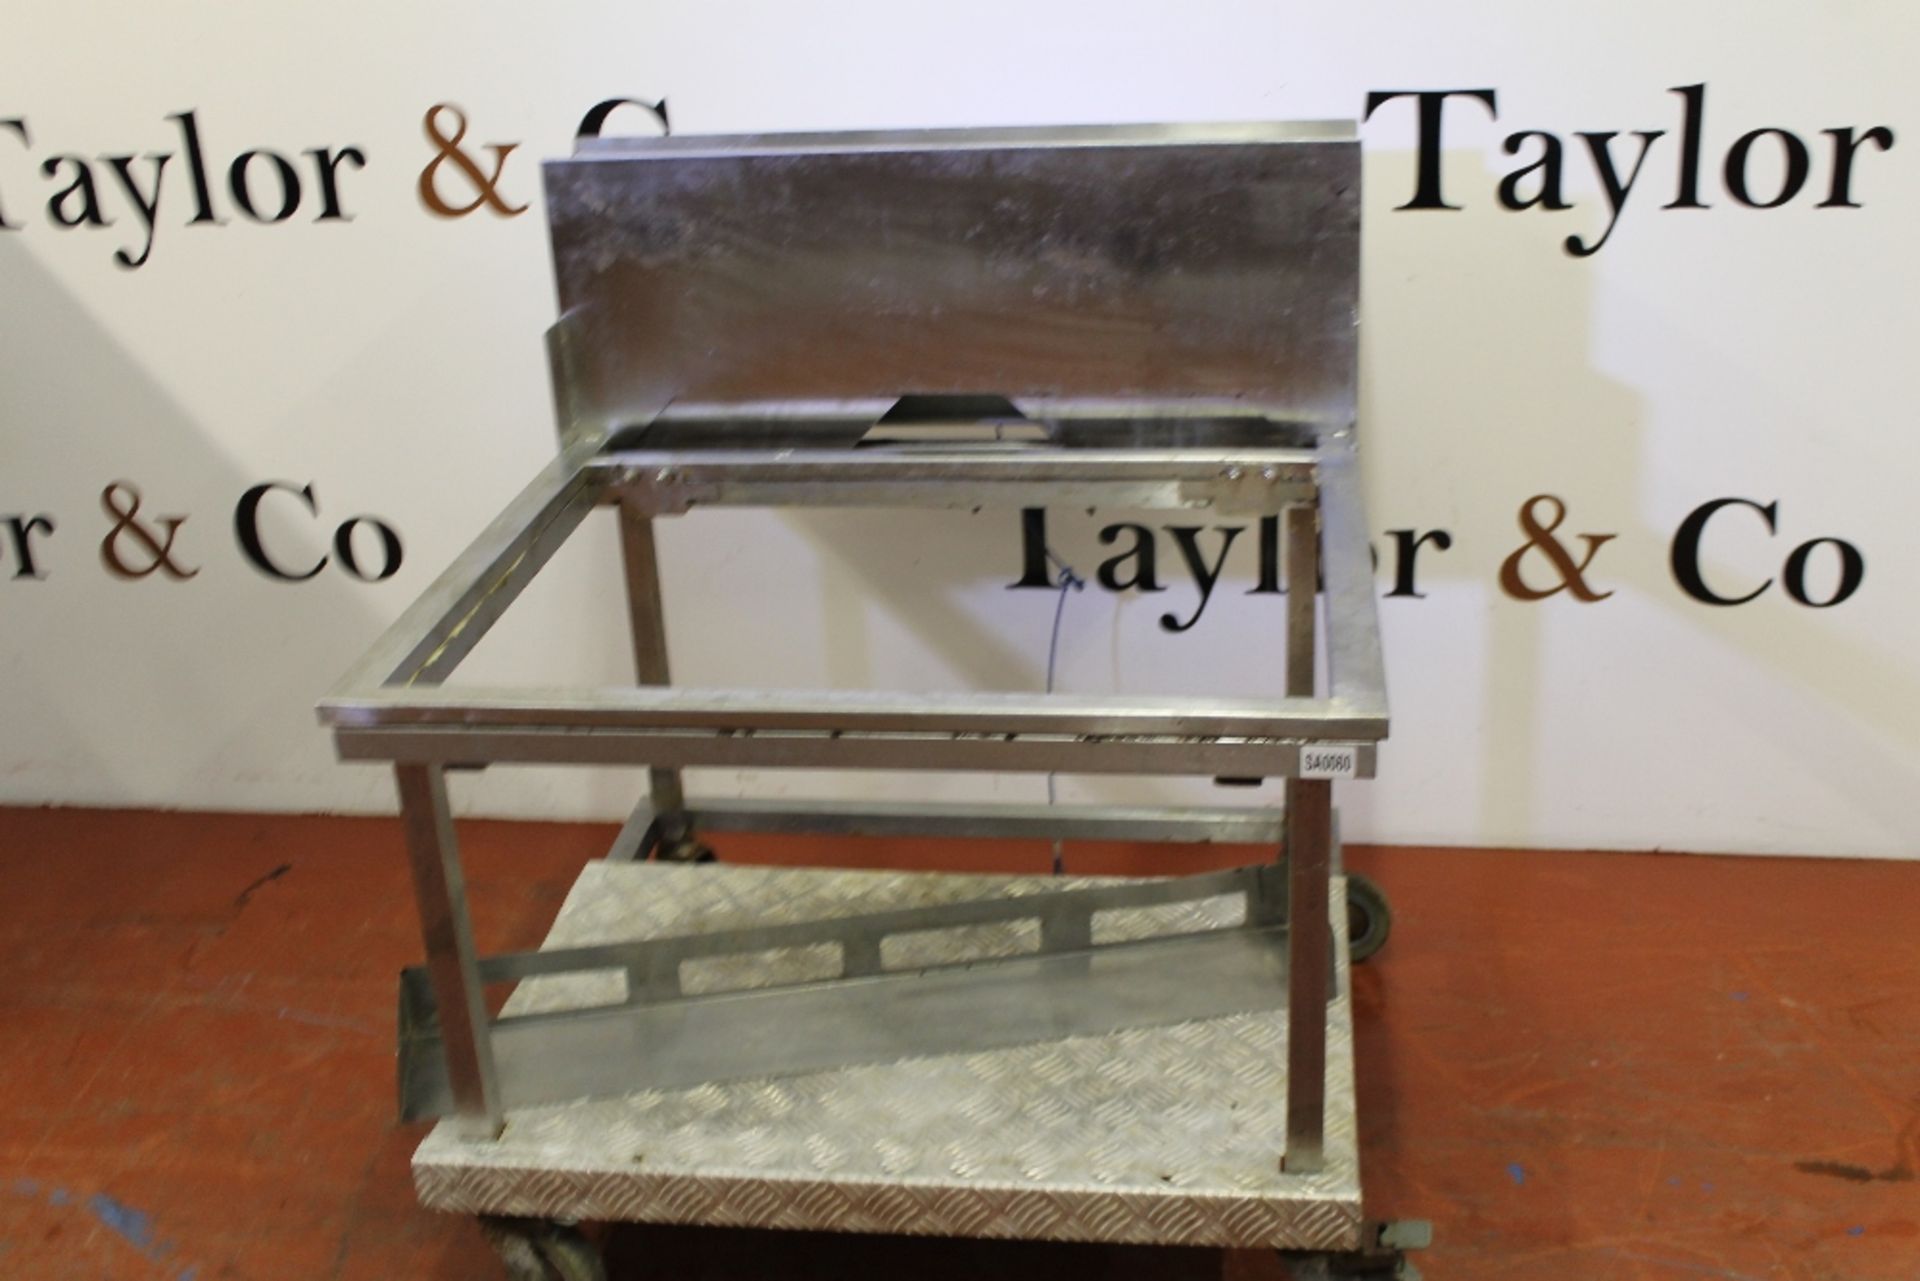 Stainless Steel Mobile Appliance Stand – 80cm x 70cm NO VAT - Image 2 of 2